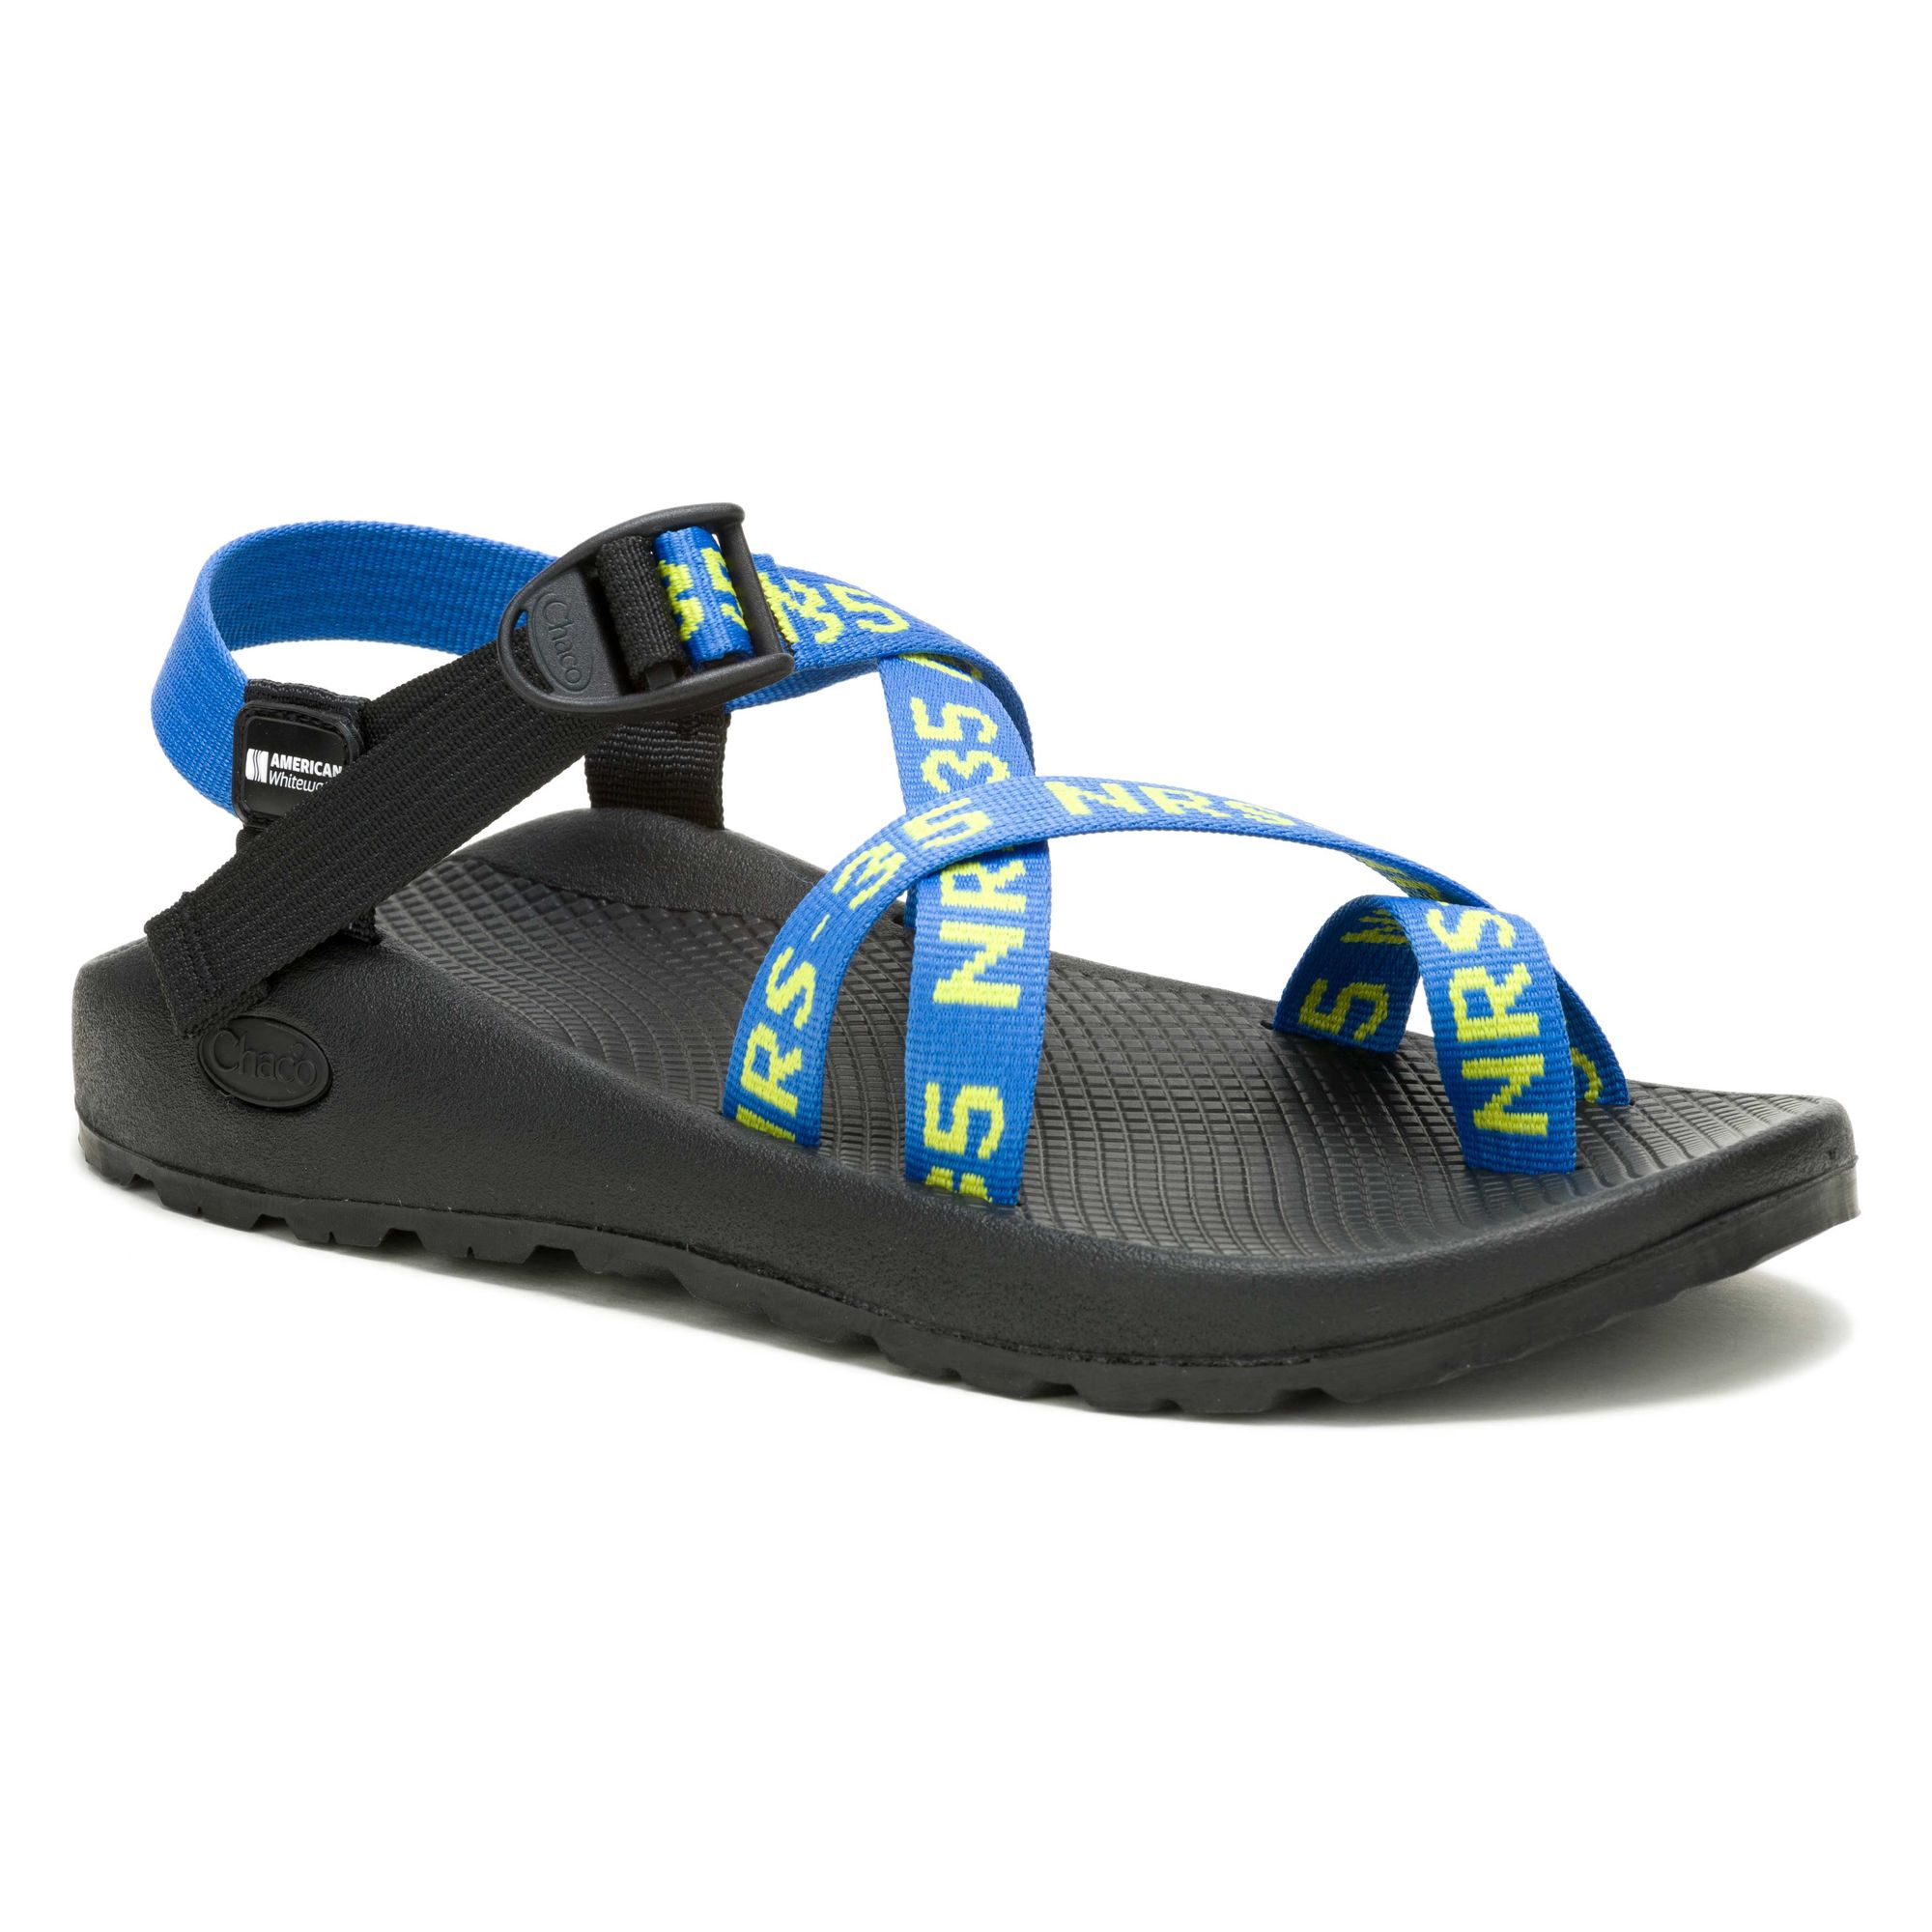 NRS + Chaco Men's Z/2 Classic Sandals